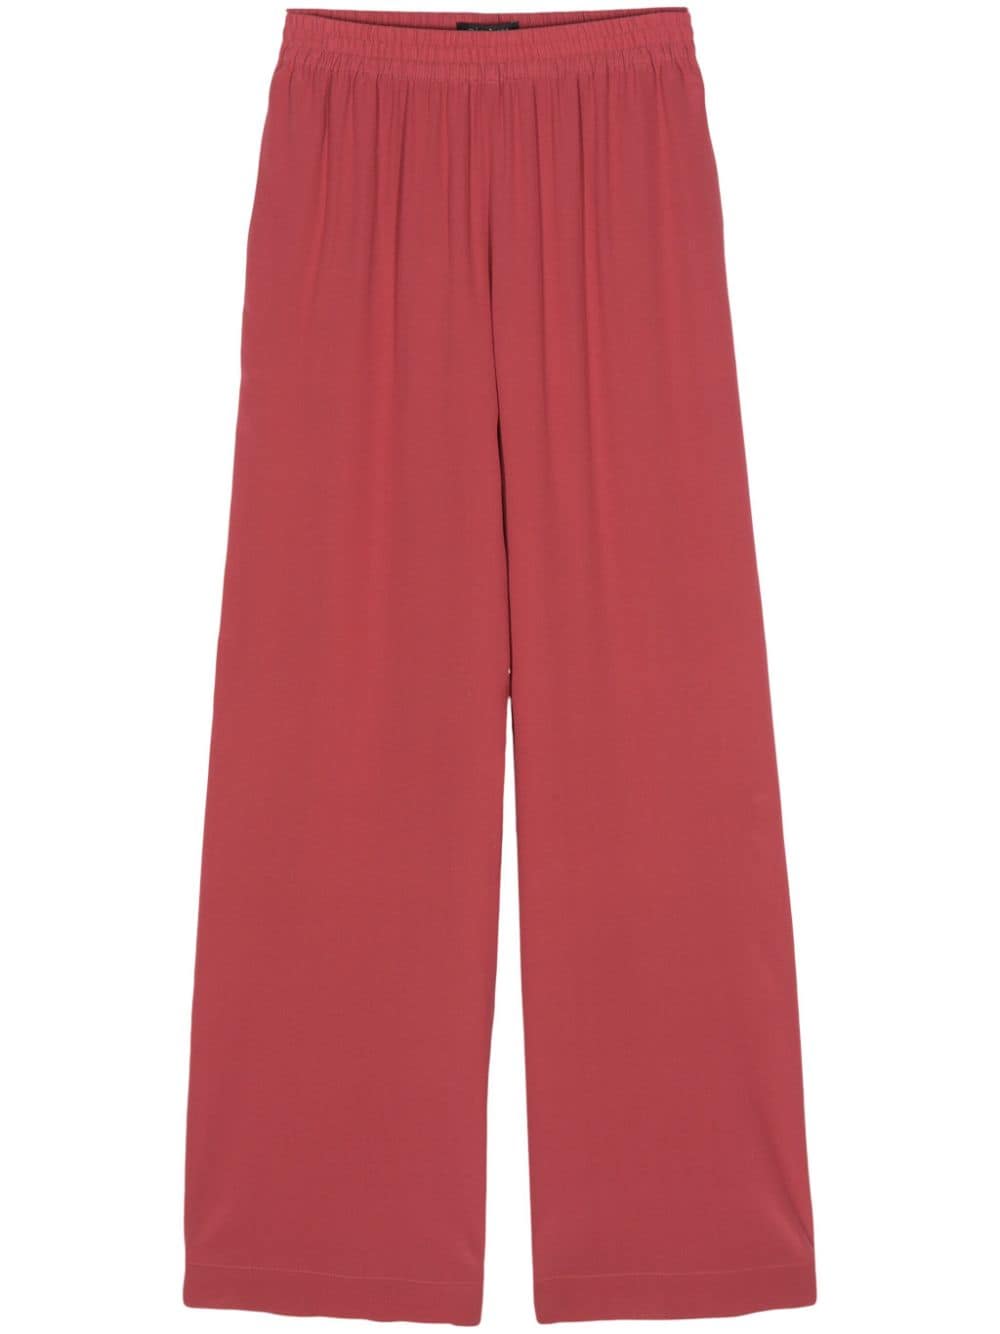 Gianluca Capannolo Antonella Silk Palazzo Pants In Red